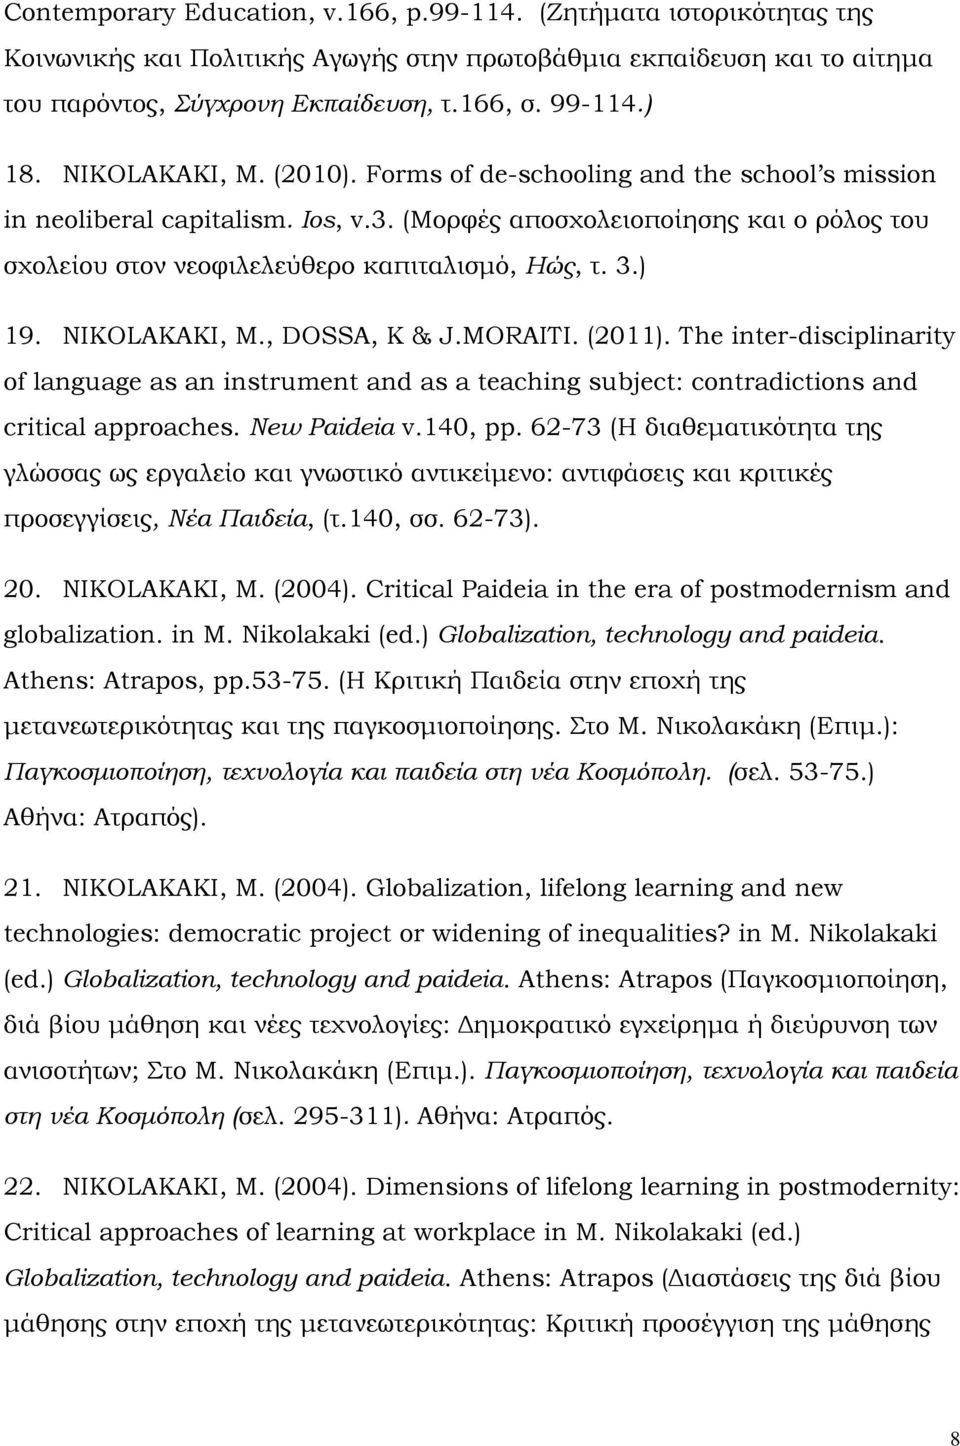 ) 19. NIKΟLAKAKI, Μ., DOSSA, Κ & J.ΜΟRΑΙΣI. (2011). The inter-disciplinarity of language as an instrument and as a teaching subject: contradictions and critical approaches. New Paideia v.140, pp.